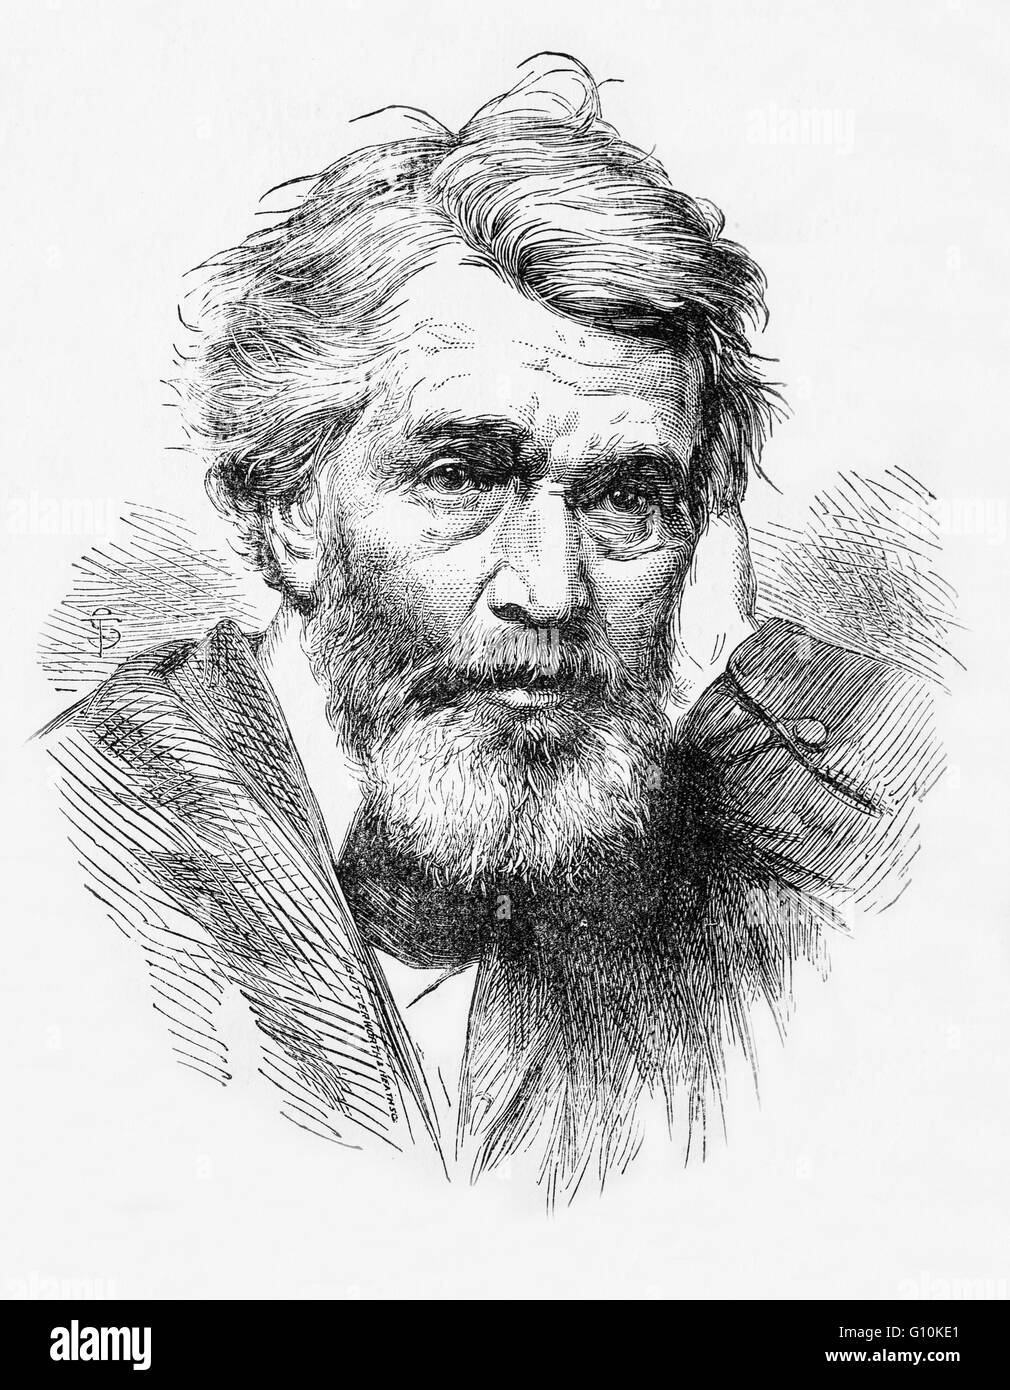 Thomas Carlyle (1795-1881), Scottish philosopher, satirical writer, essayist, historian and teacher. Considered one of the most important social commentators of his time Stock Photo